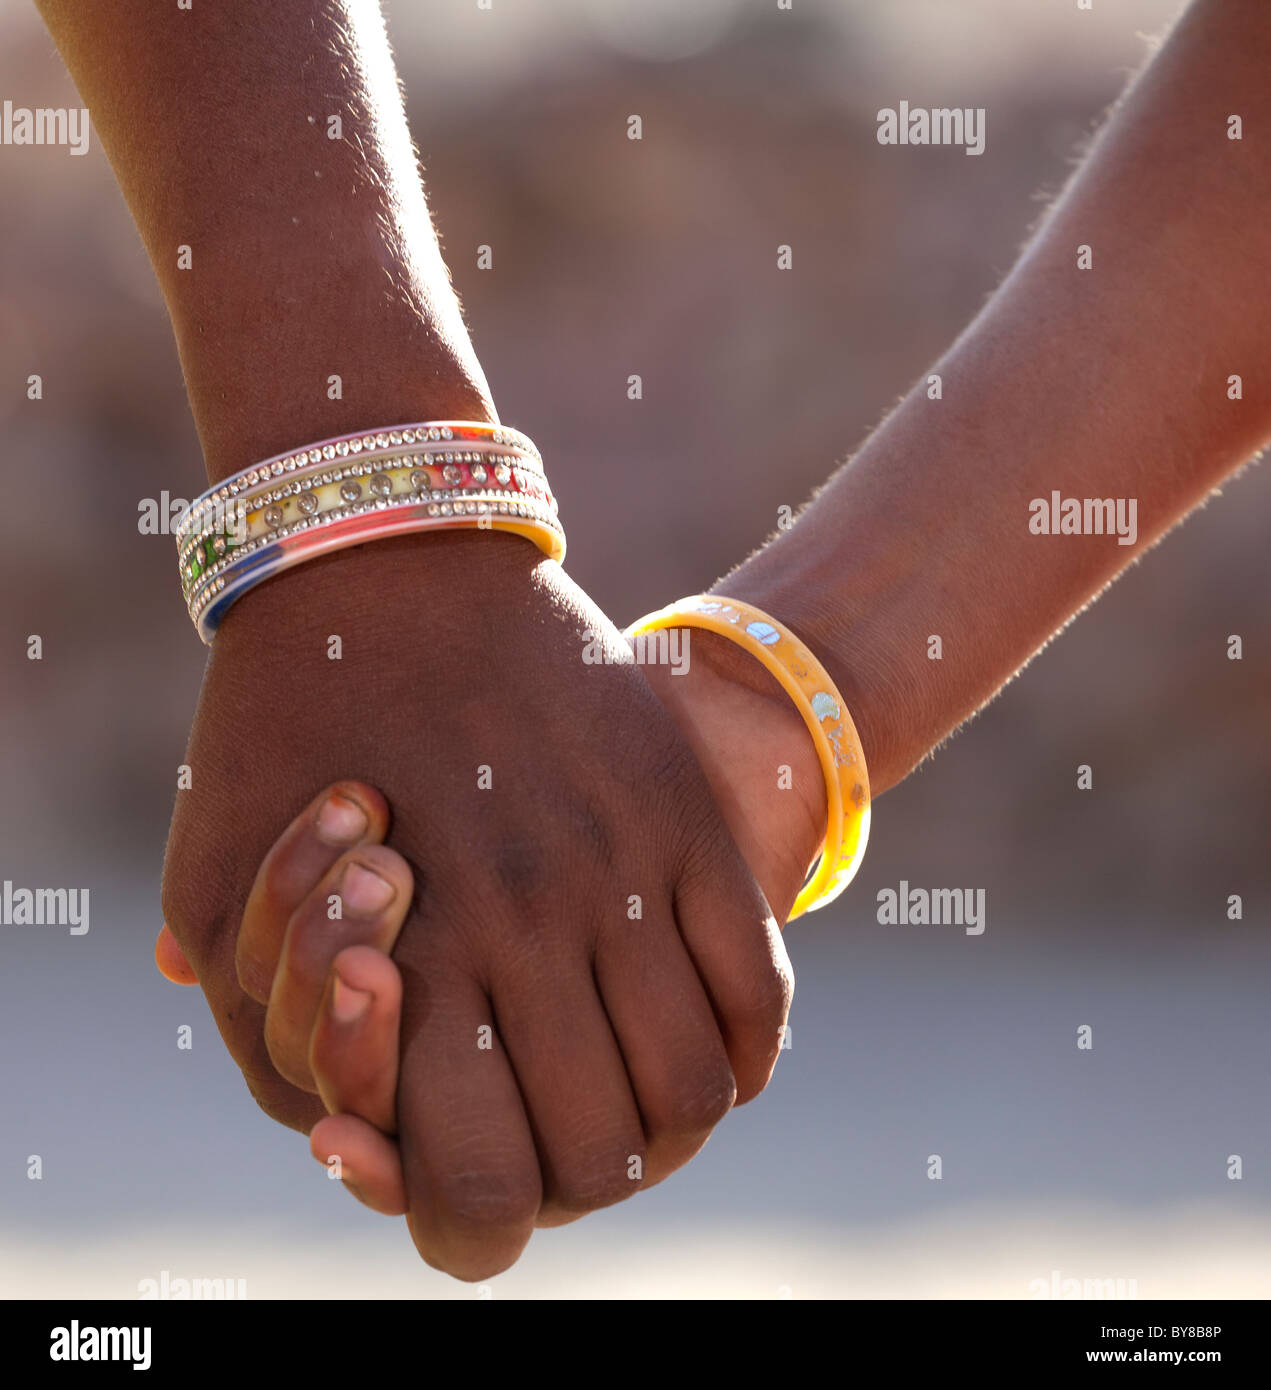 Indian Girls Holding Hands High Resolution Stock Photography And Images Alamy